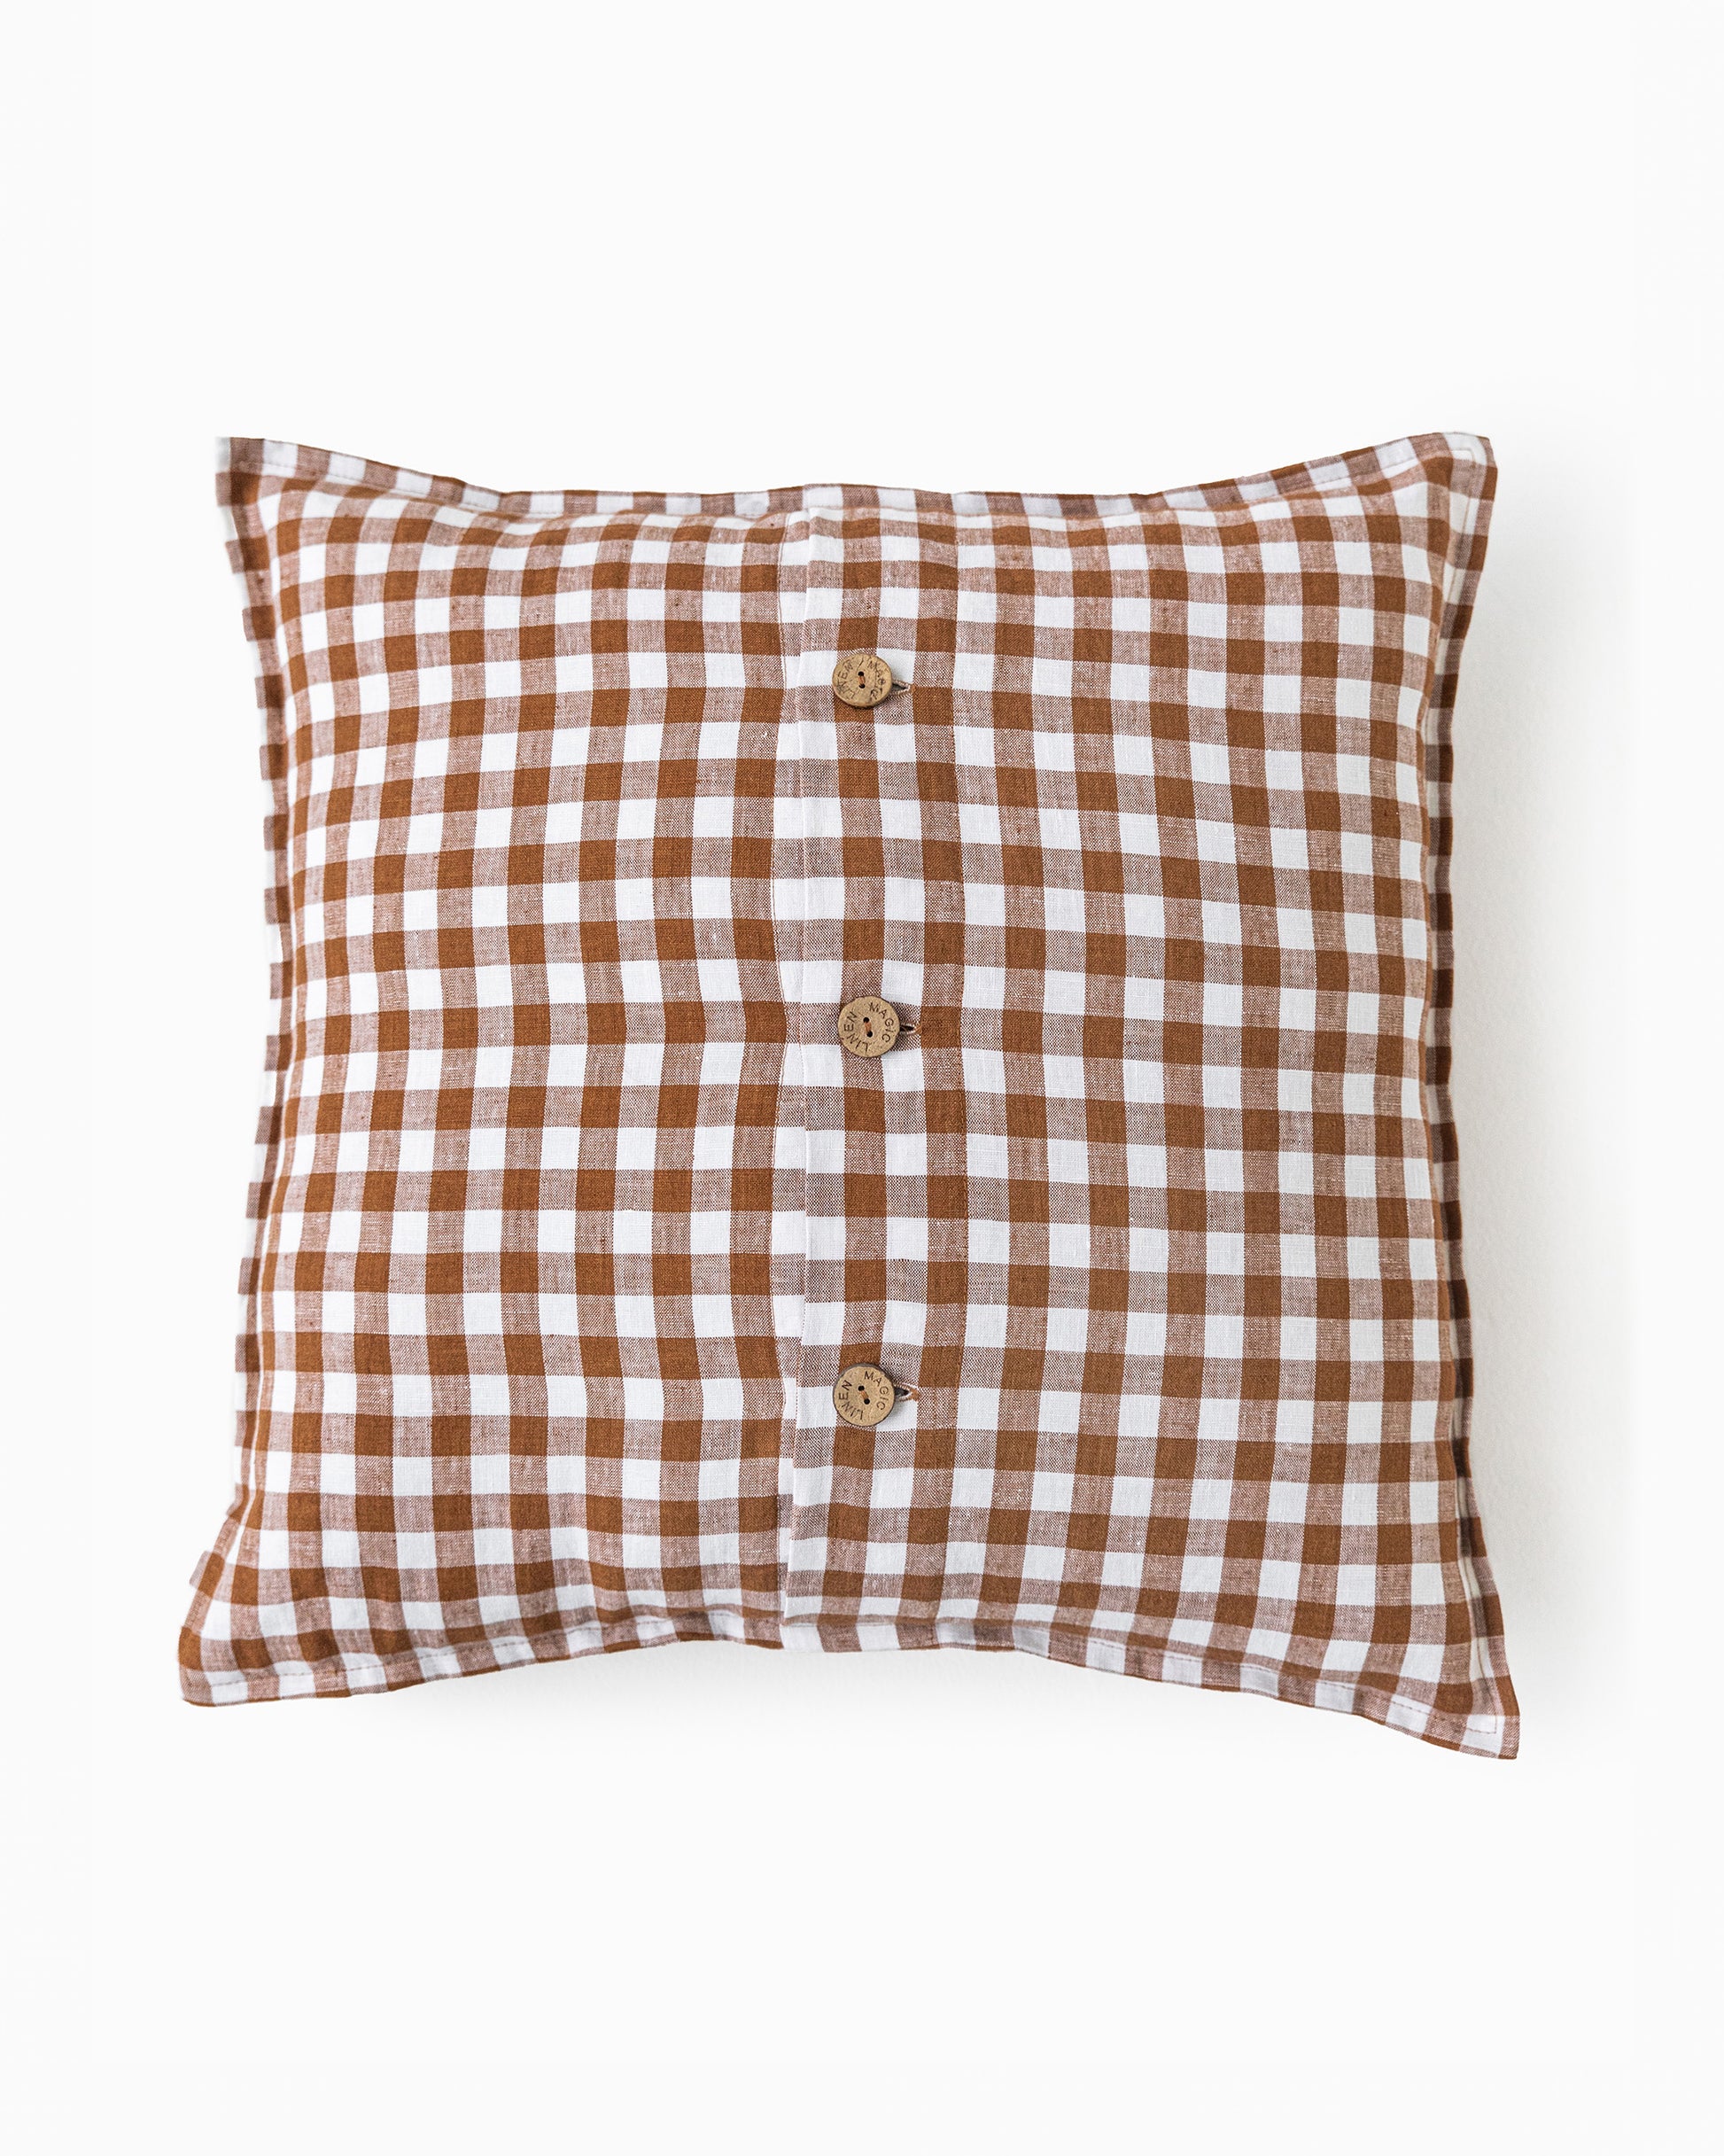 Deco pillow cover with buttons in Cinnamon gingham - MagicLinen